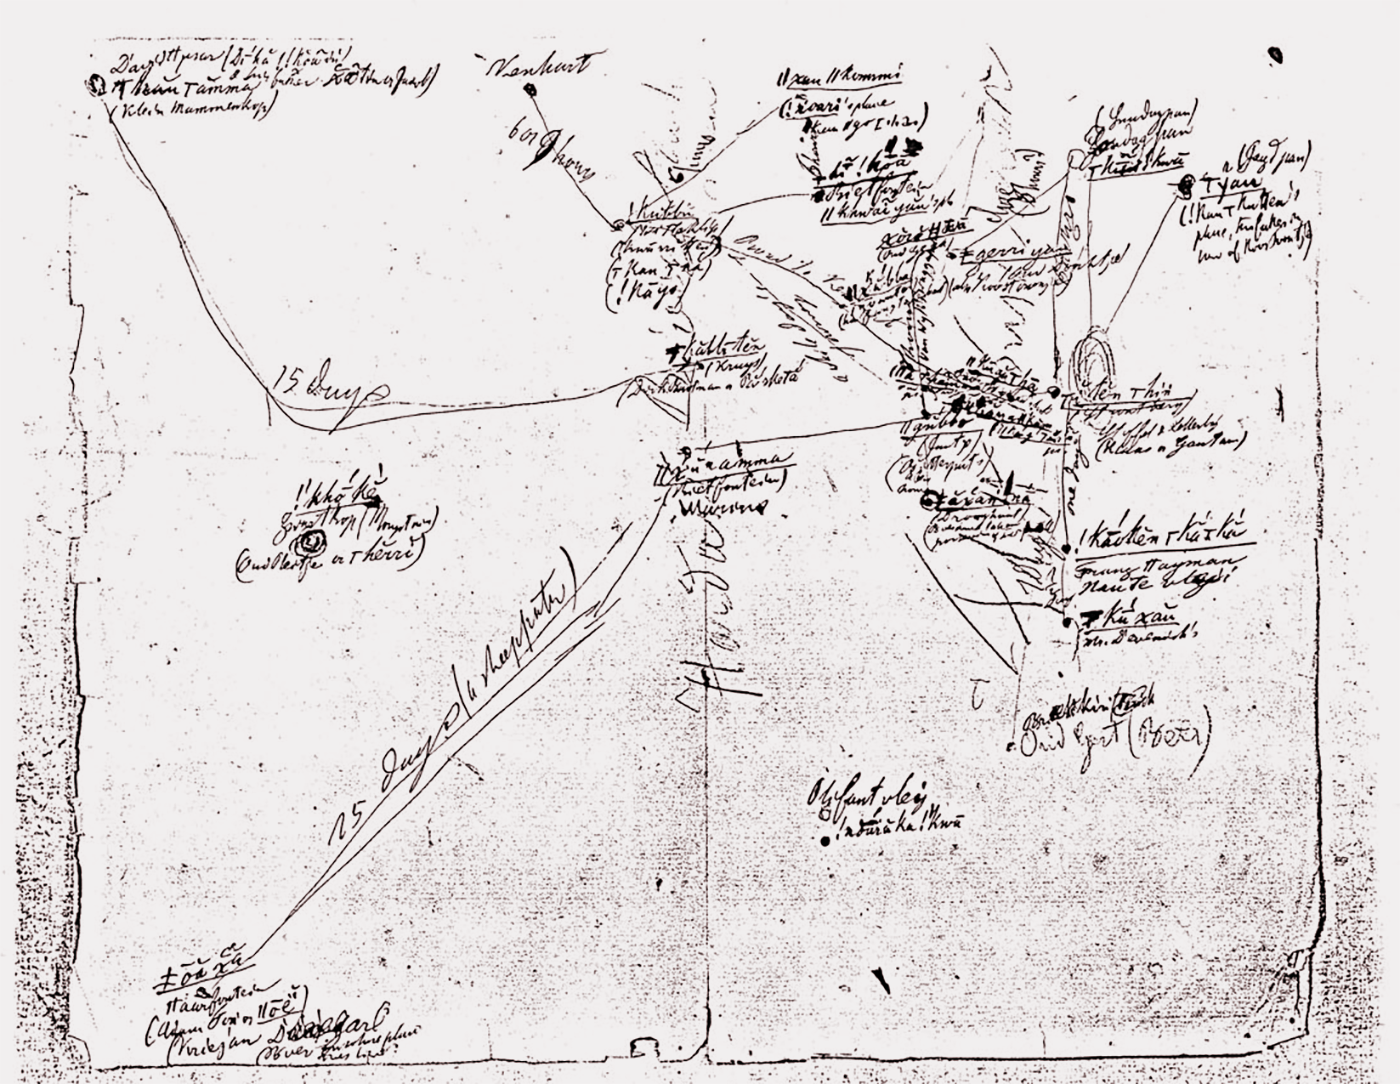 The map drawn in 1870 by Wilhelm Bleek with information from ǁkabbo about his home territory. The town of Kenhardt is at the top, left of centre